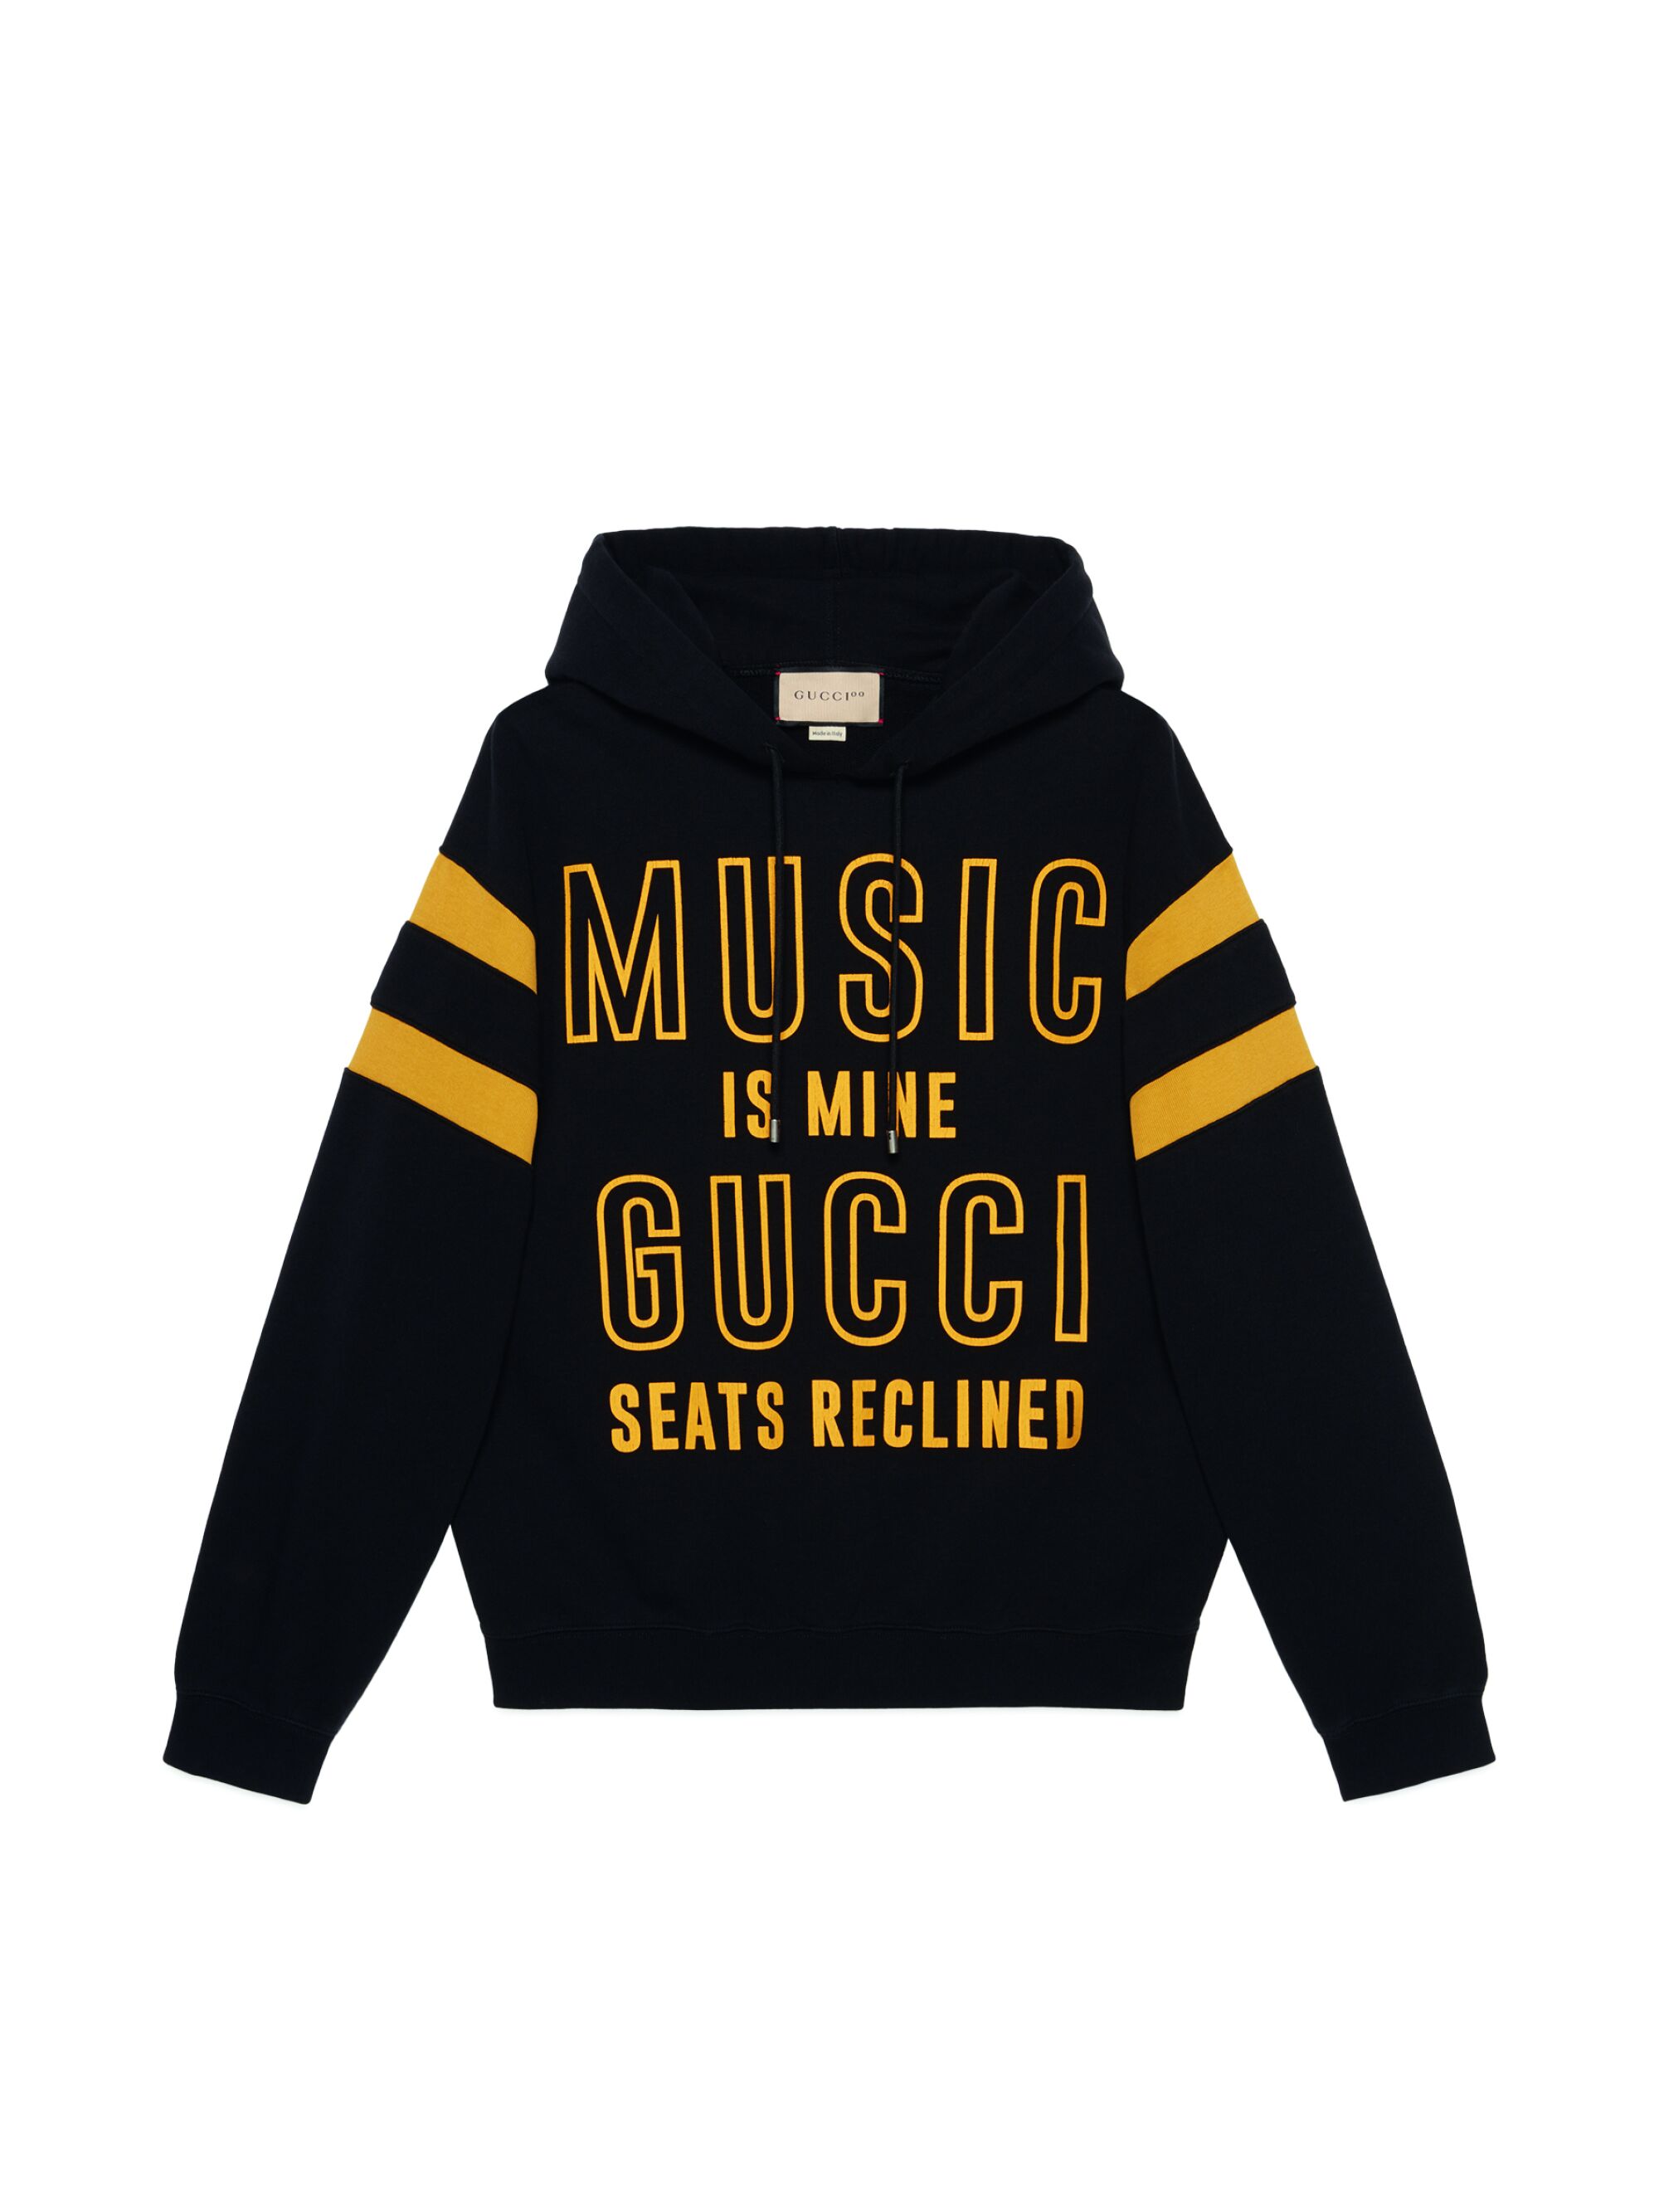 Gucci sweatshirt with "Music is mine, Gucci seats reclined" on the back